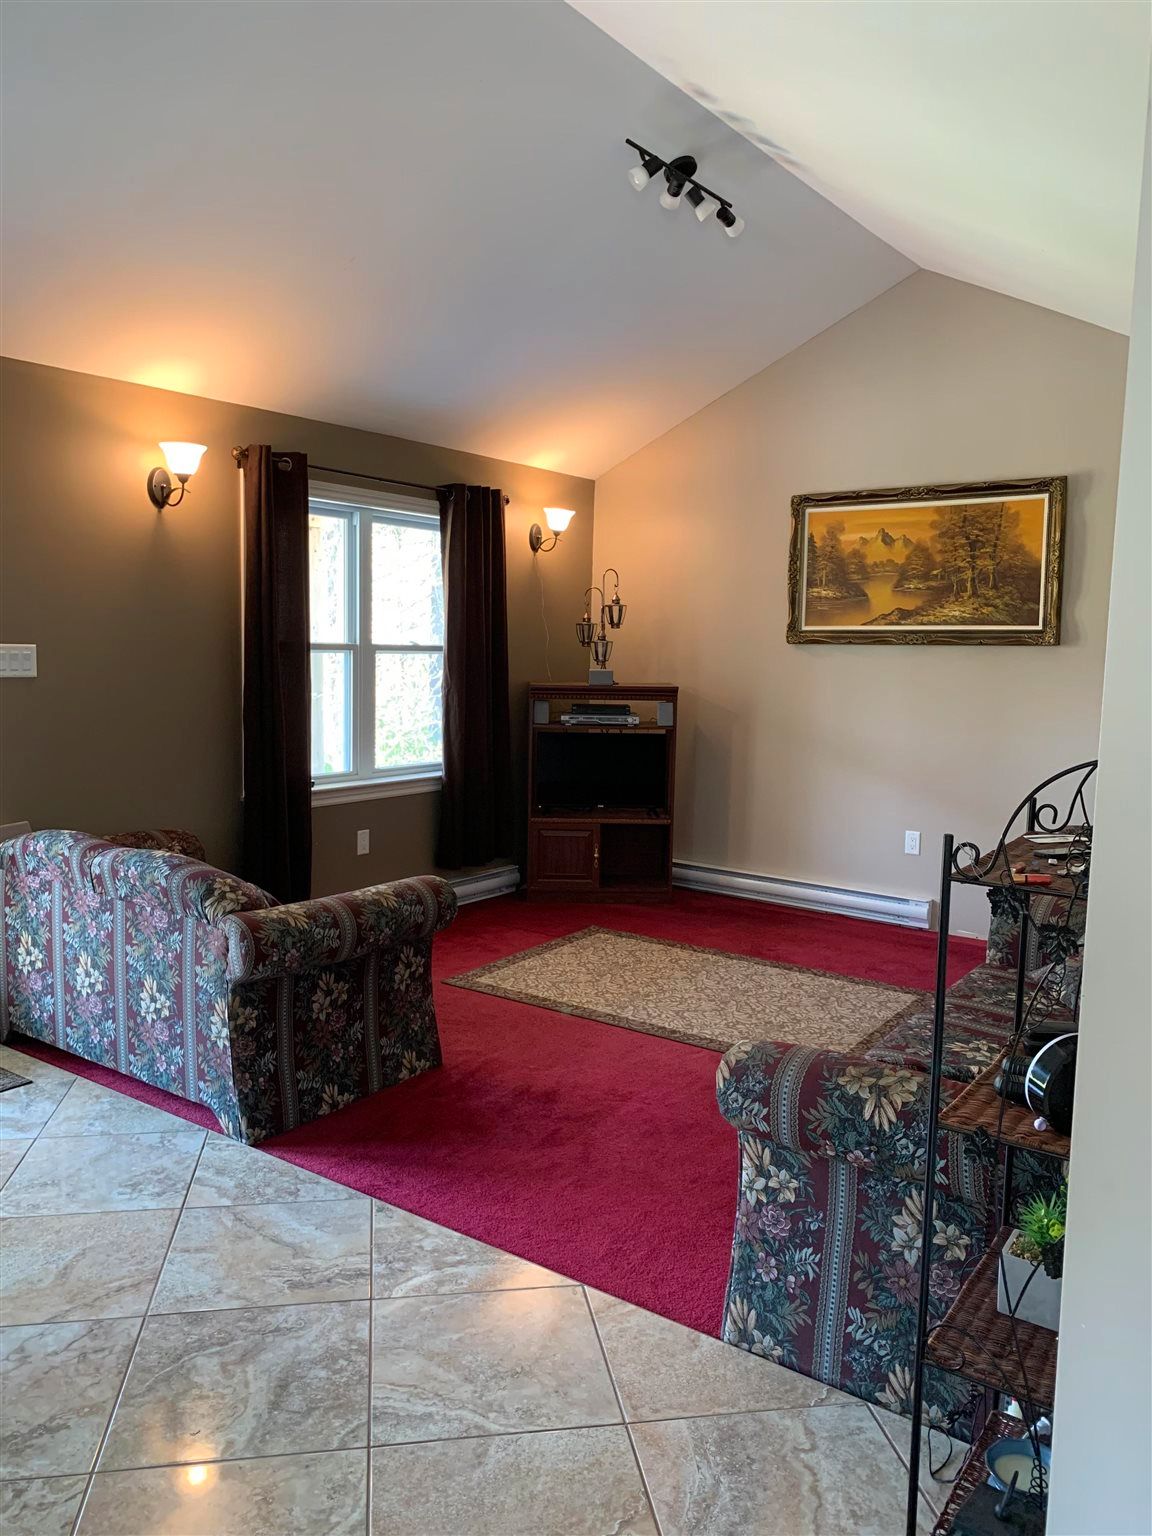 Photo 5: Photos: 276 Falkenham Road in East Dalhousie: 404-Kings County Residential for sale (Annapolis Valley)  : MLS®# 202111989